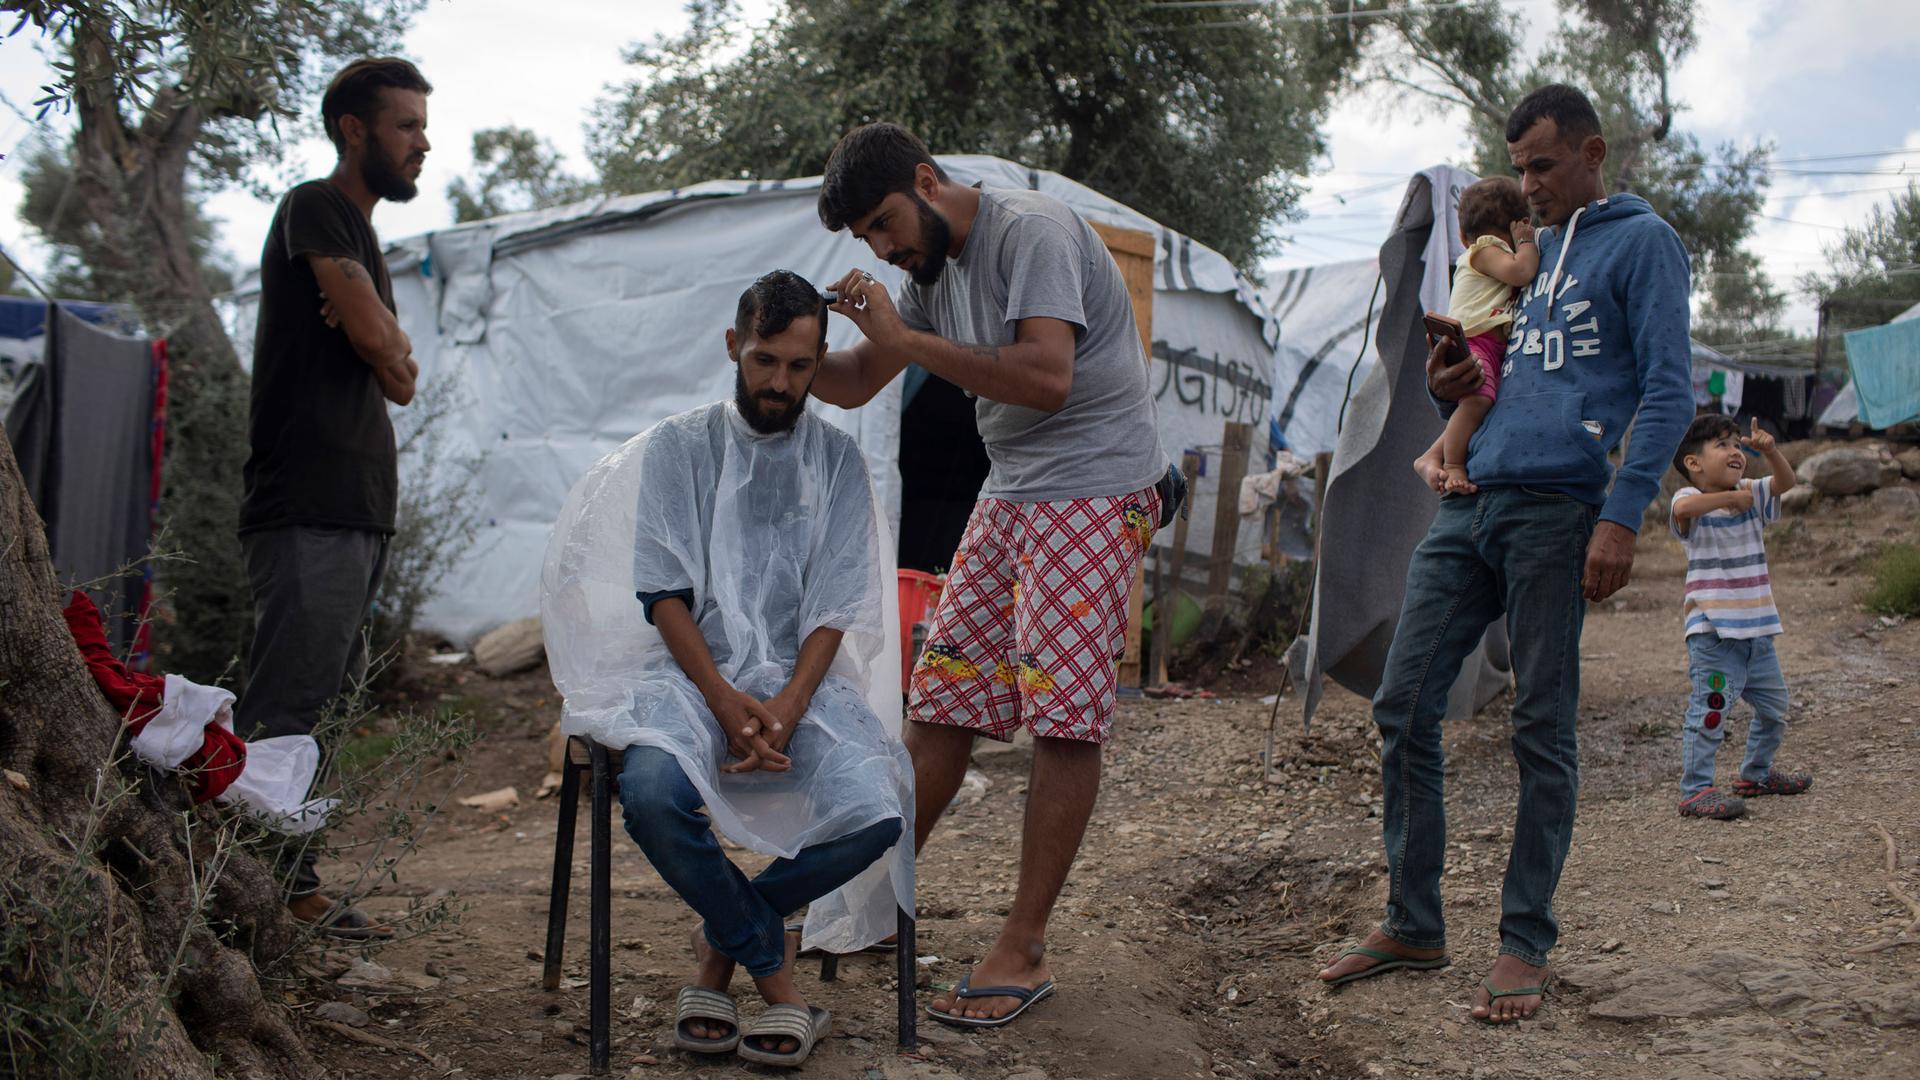 In this photo from 2019, Gasan, a 25-year-old Syrian, gives a hair cut to 31-year-old Ali from Baghdad, Iraq, in the overcrowded Moria refugee and migrant camp, Lesbos island, Greece.